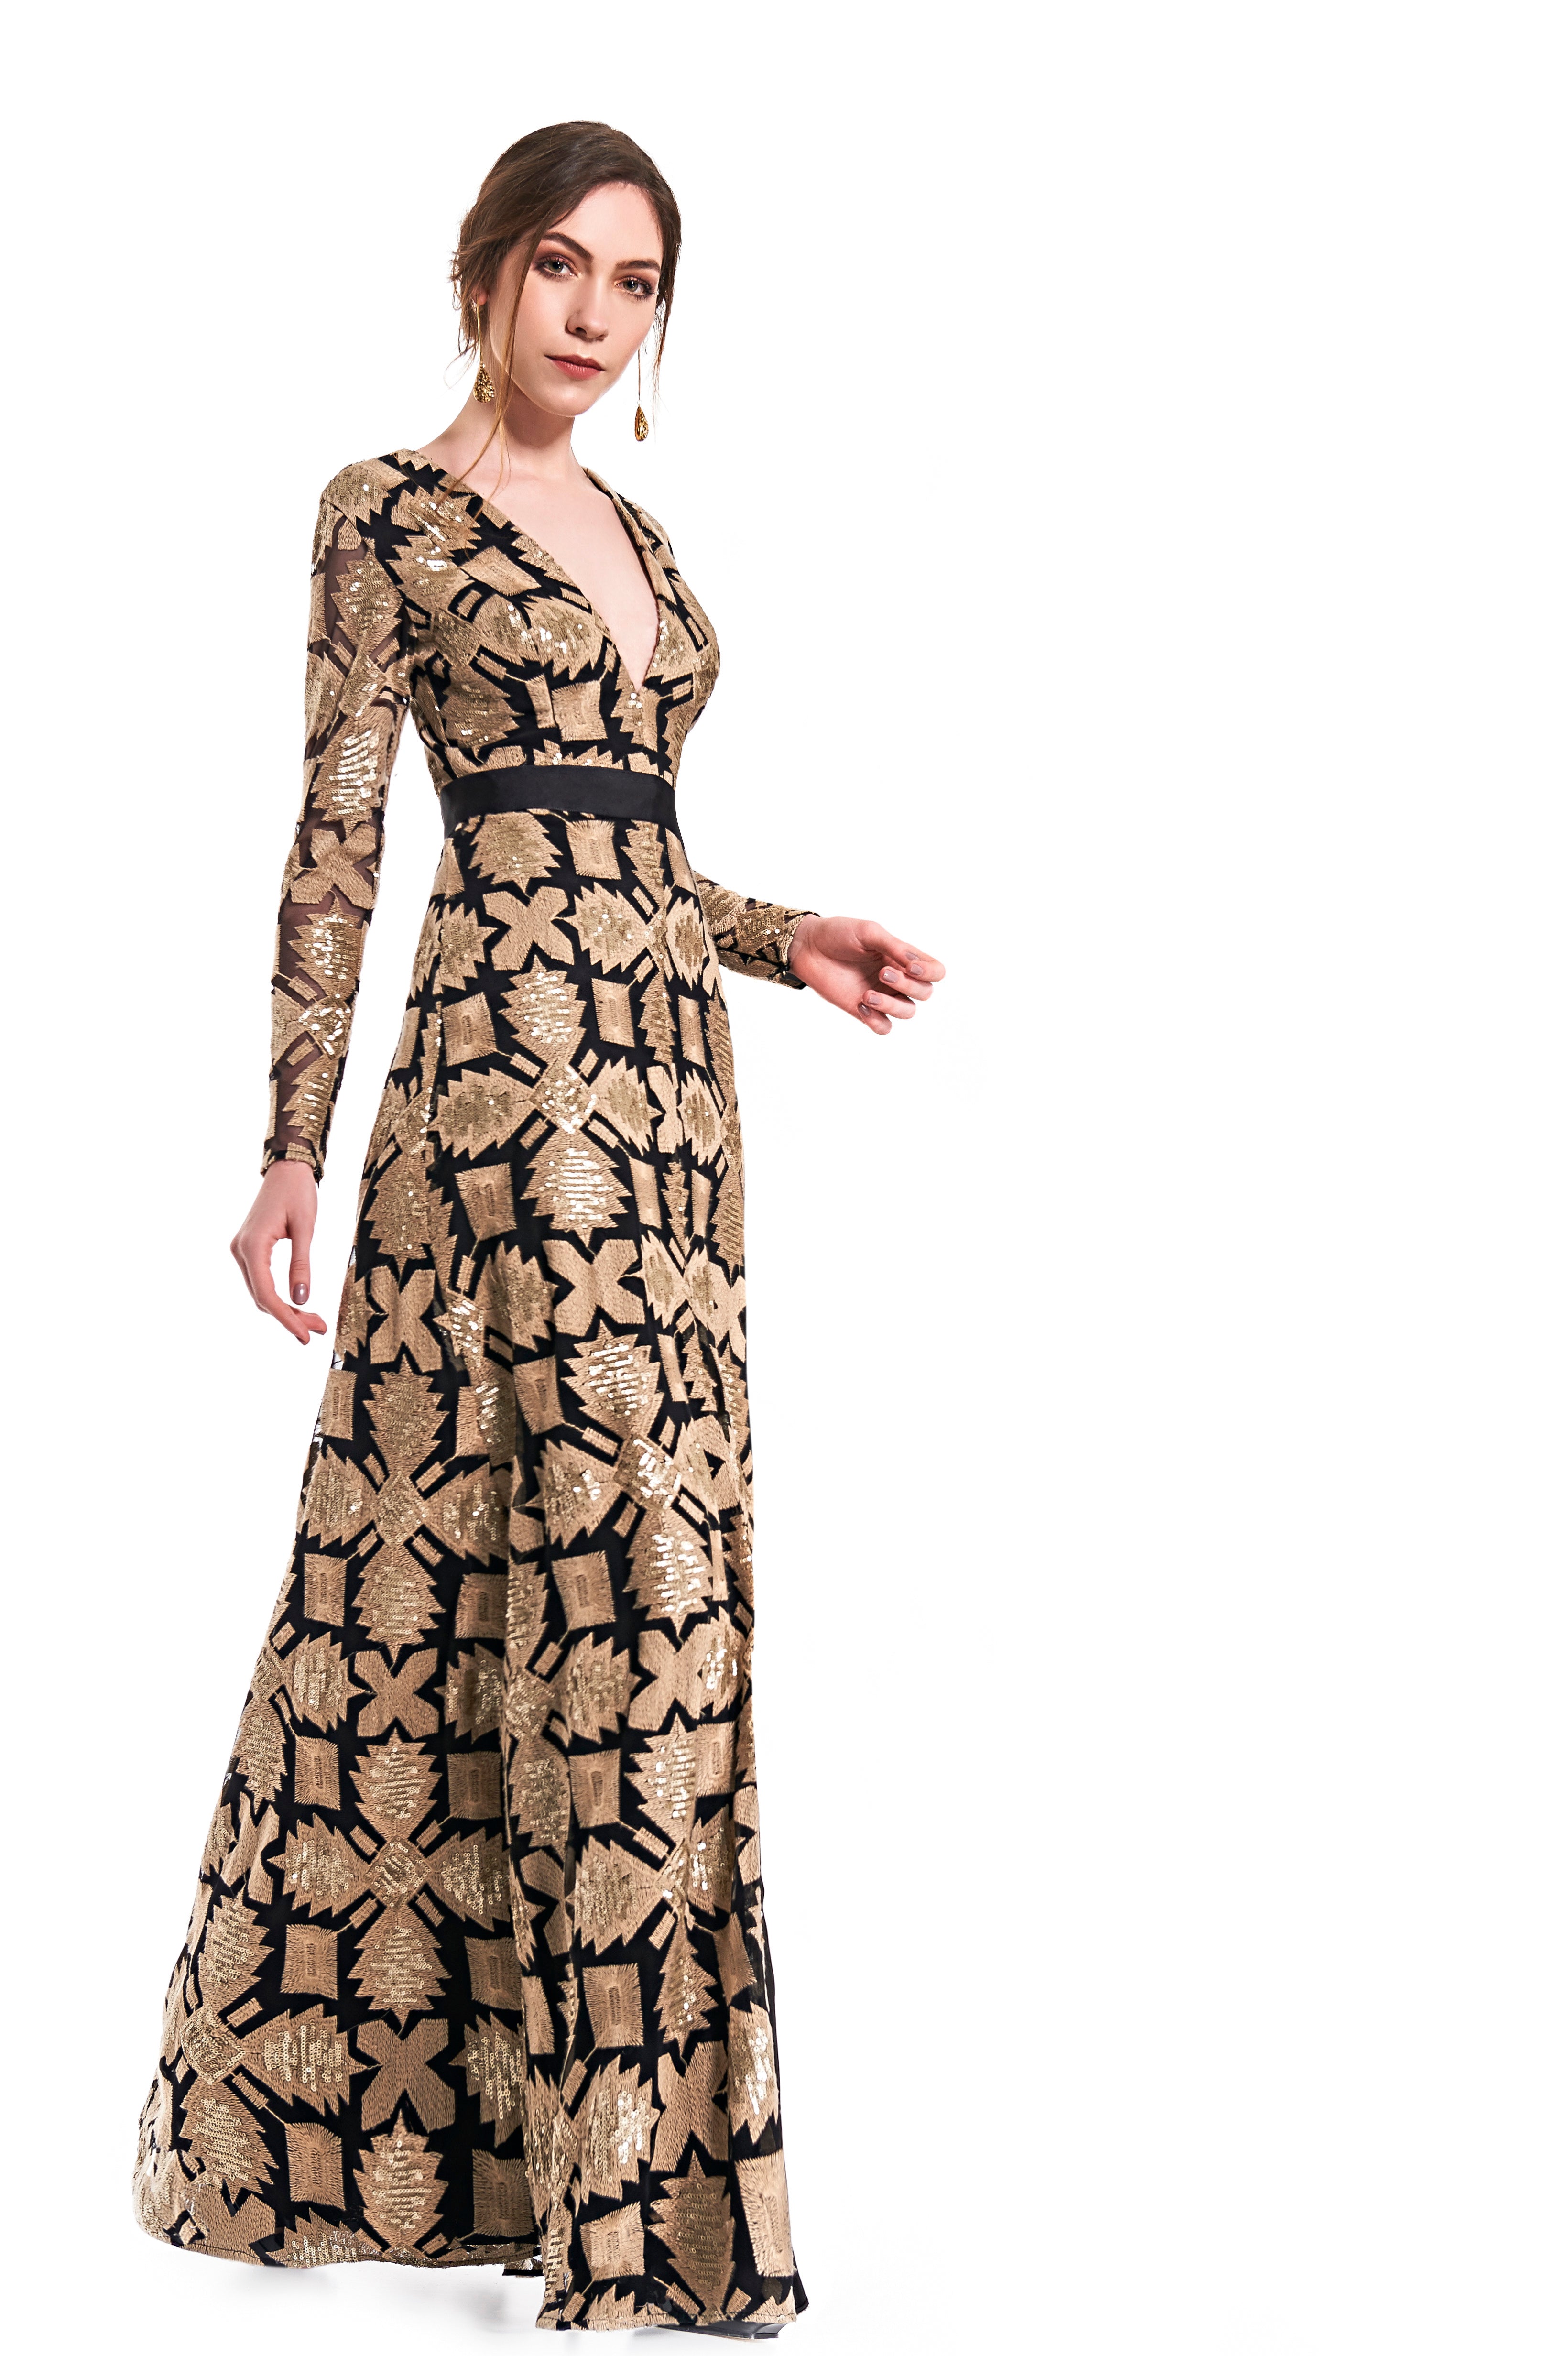 BLACK AND GOLD LACE GOWN